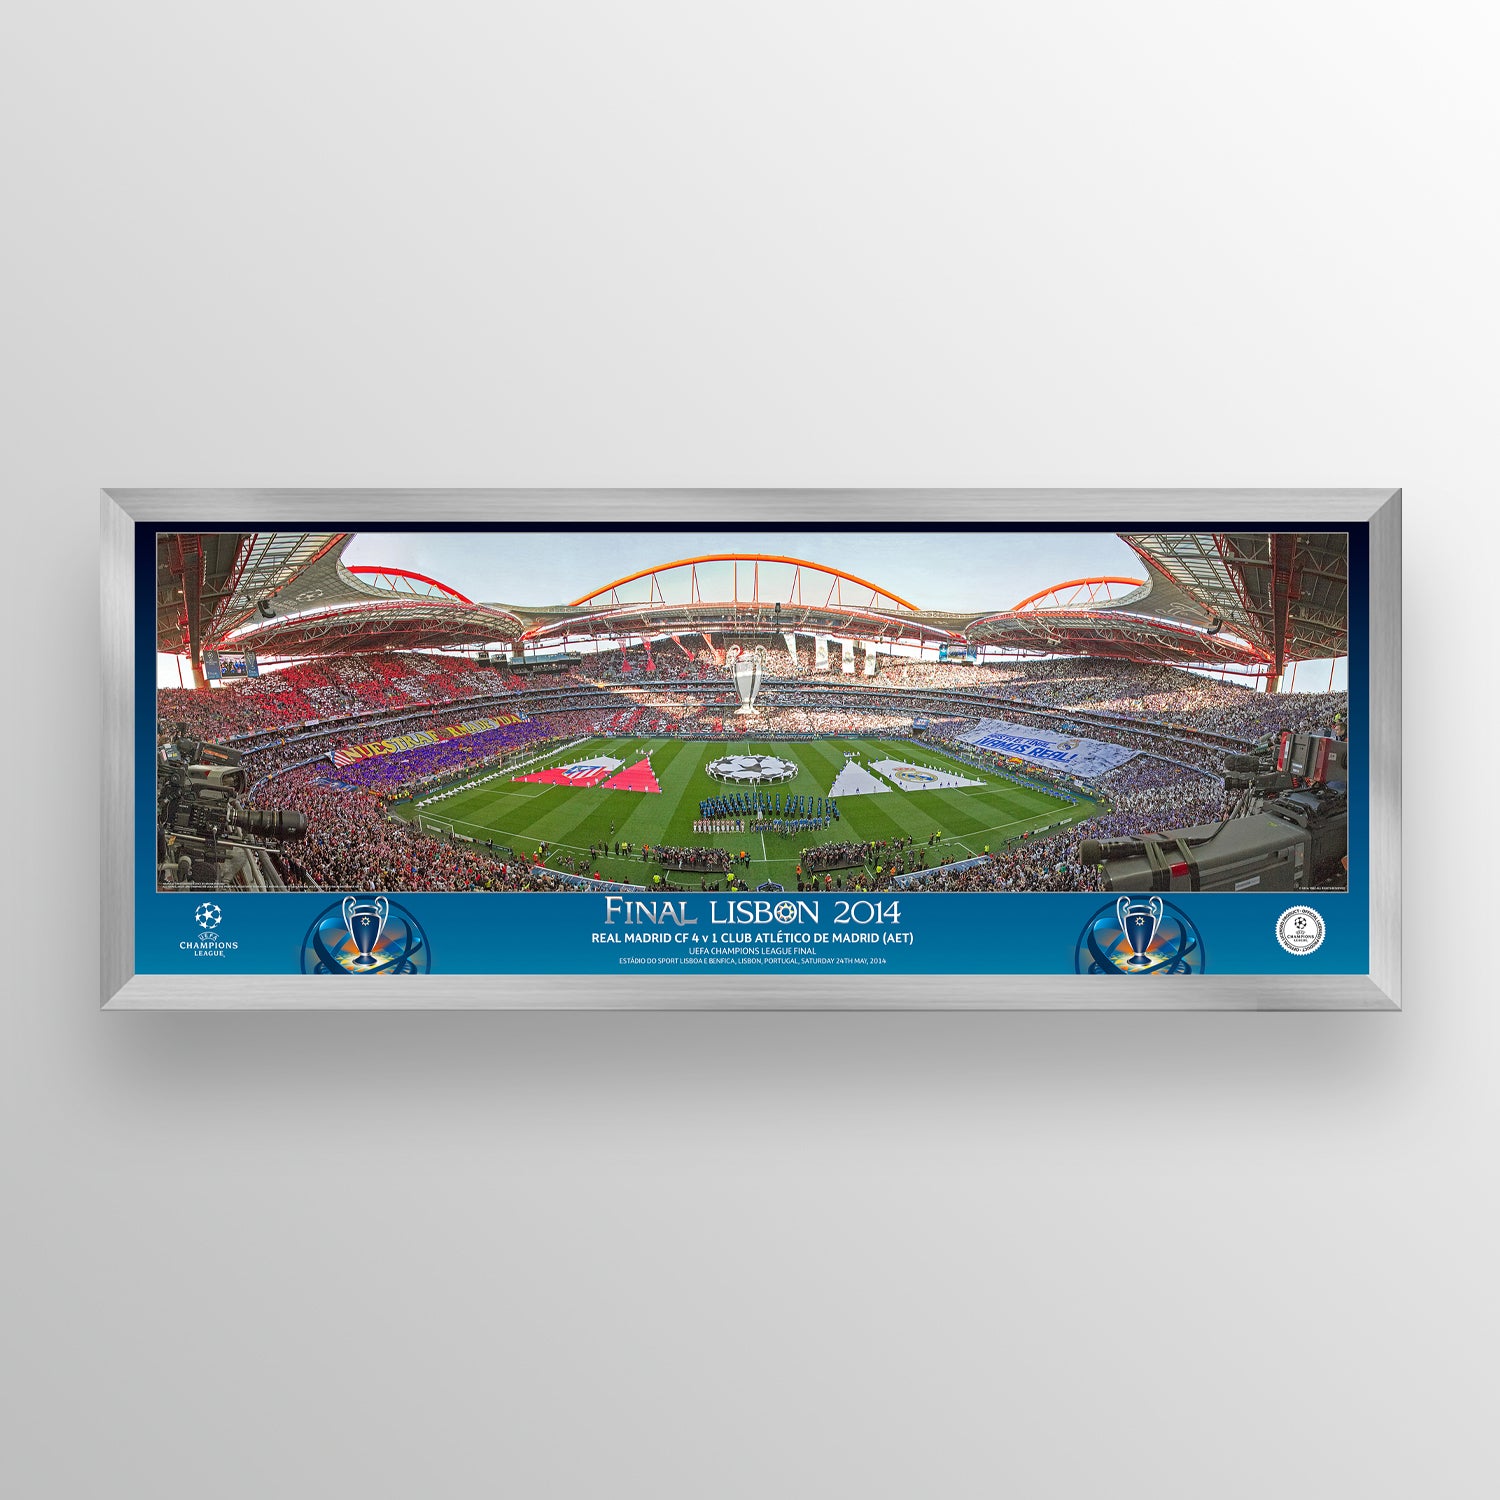 UEFA Champions League 2014 Final - Winner: Real Madrid - Landscape Frame UEFA Club Competitions Online Store